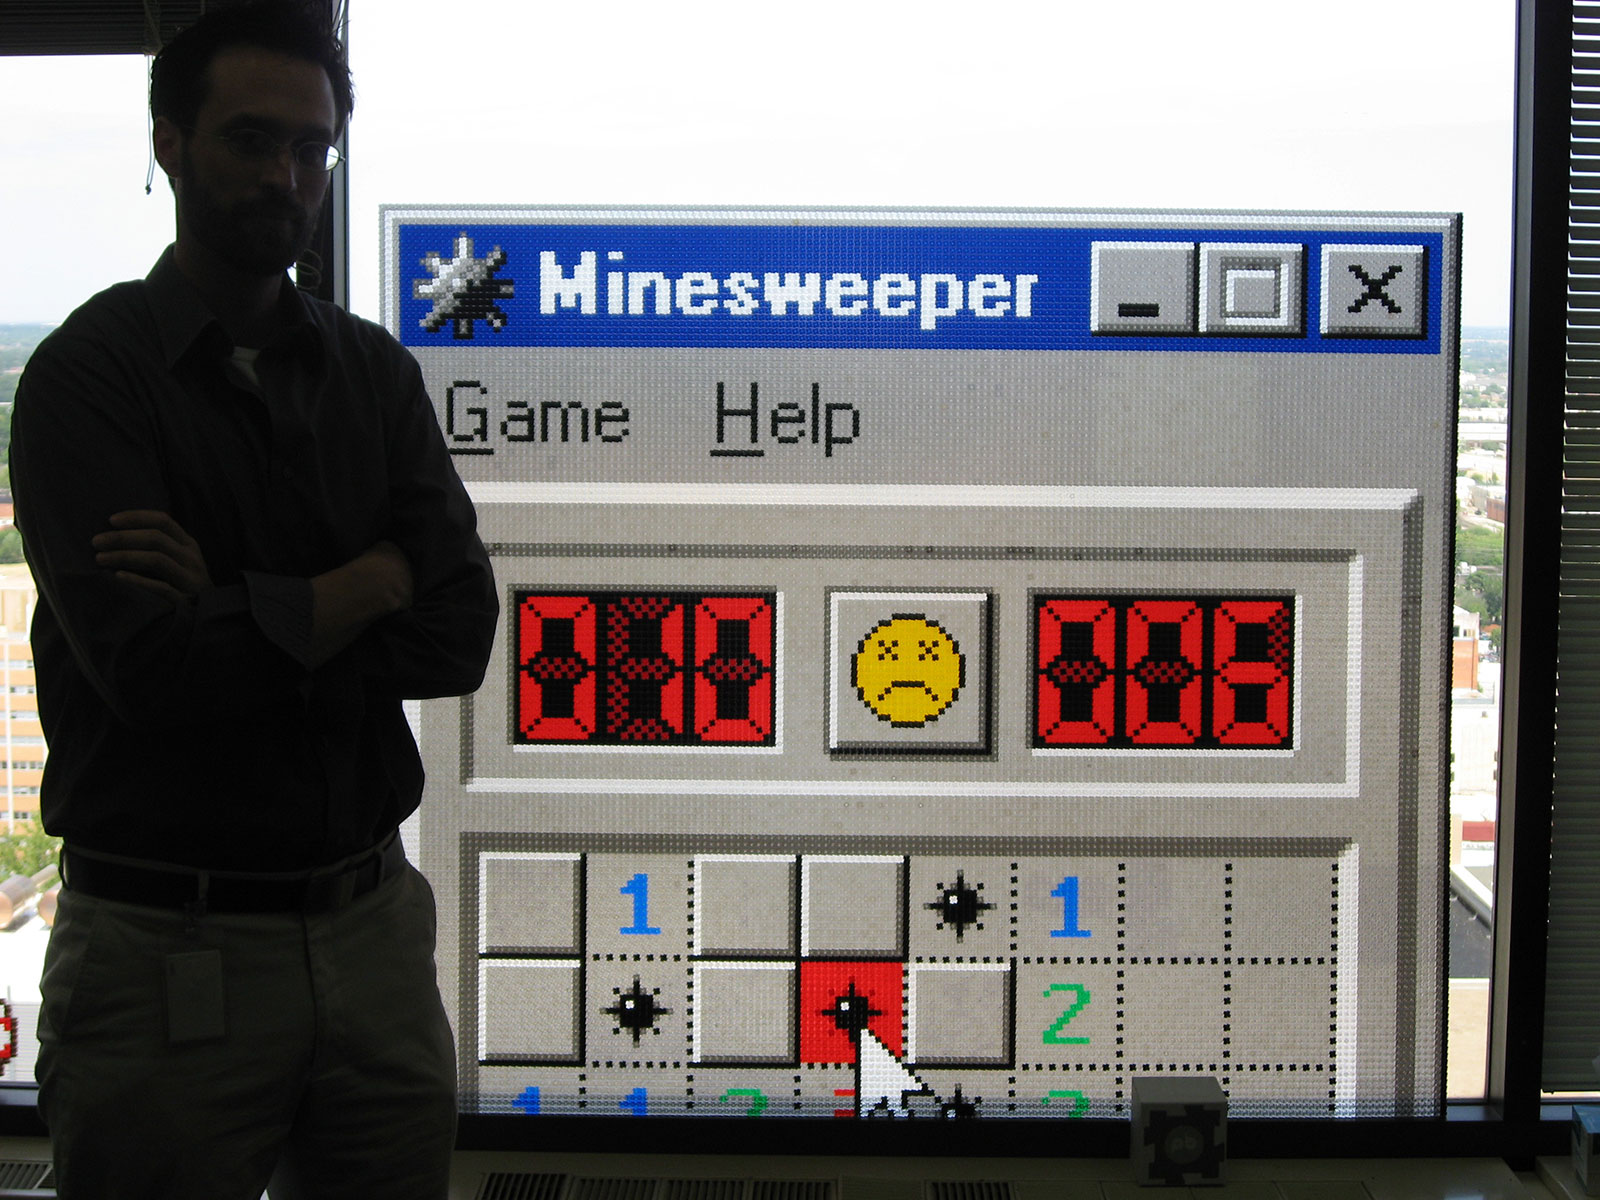 Windows “Minesweeper” game scene, assembled with translucent Pixelblocks!